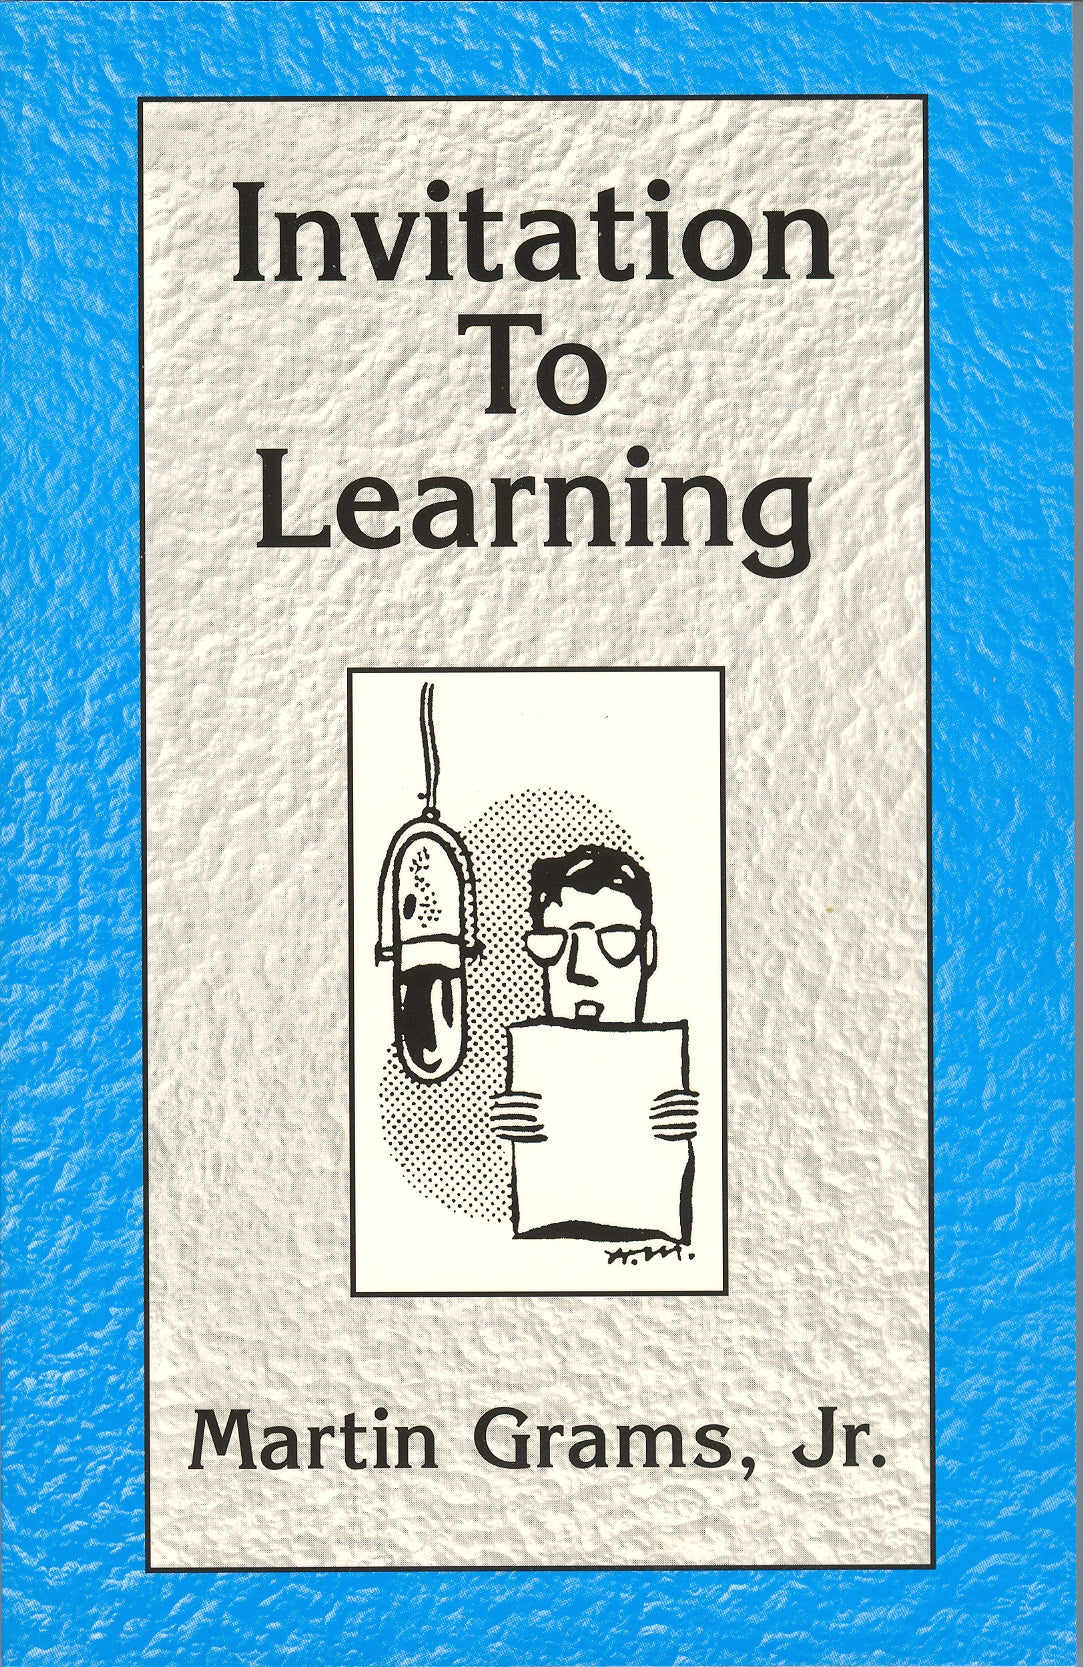 INVITATION TO LEARNING